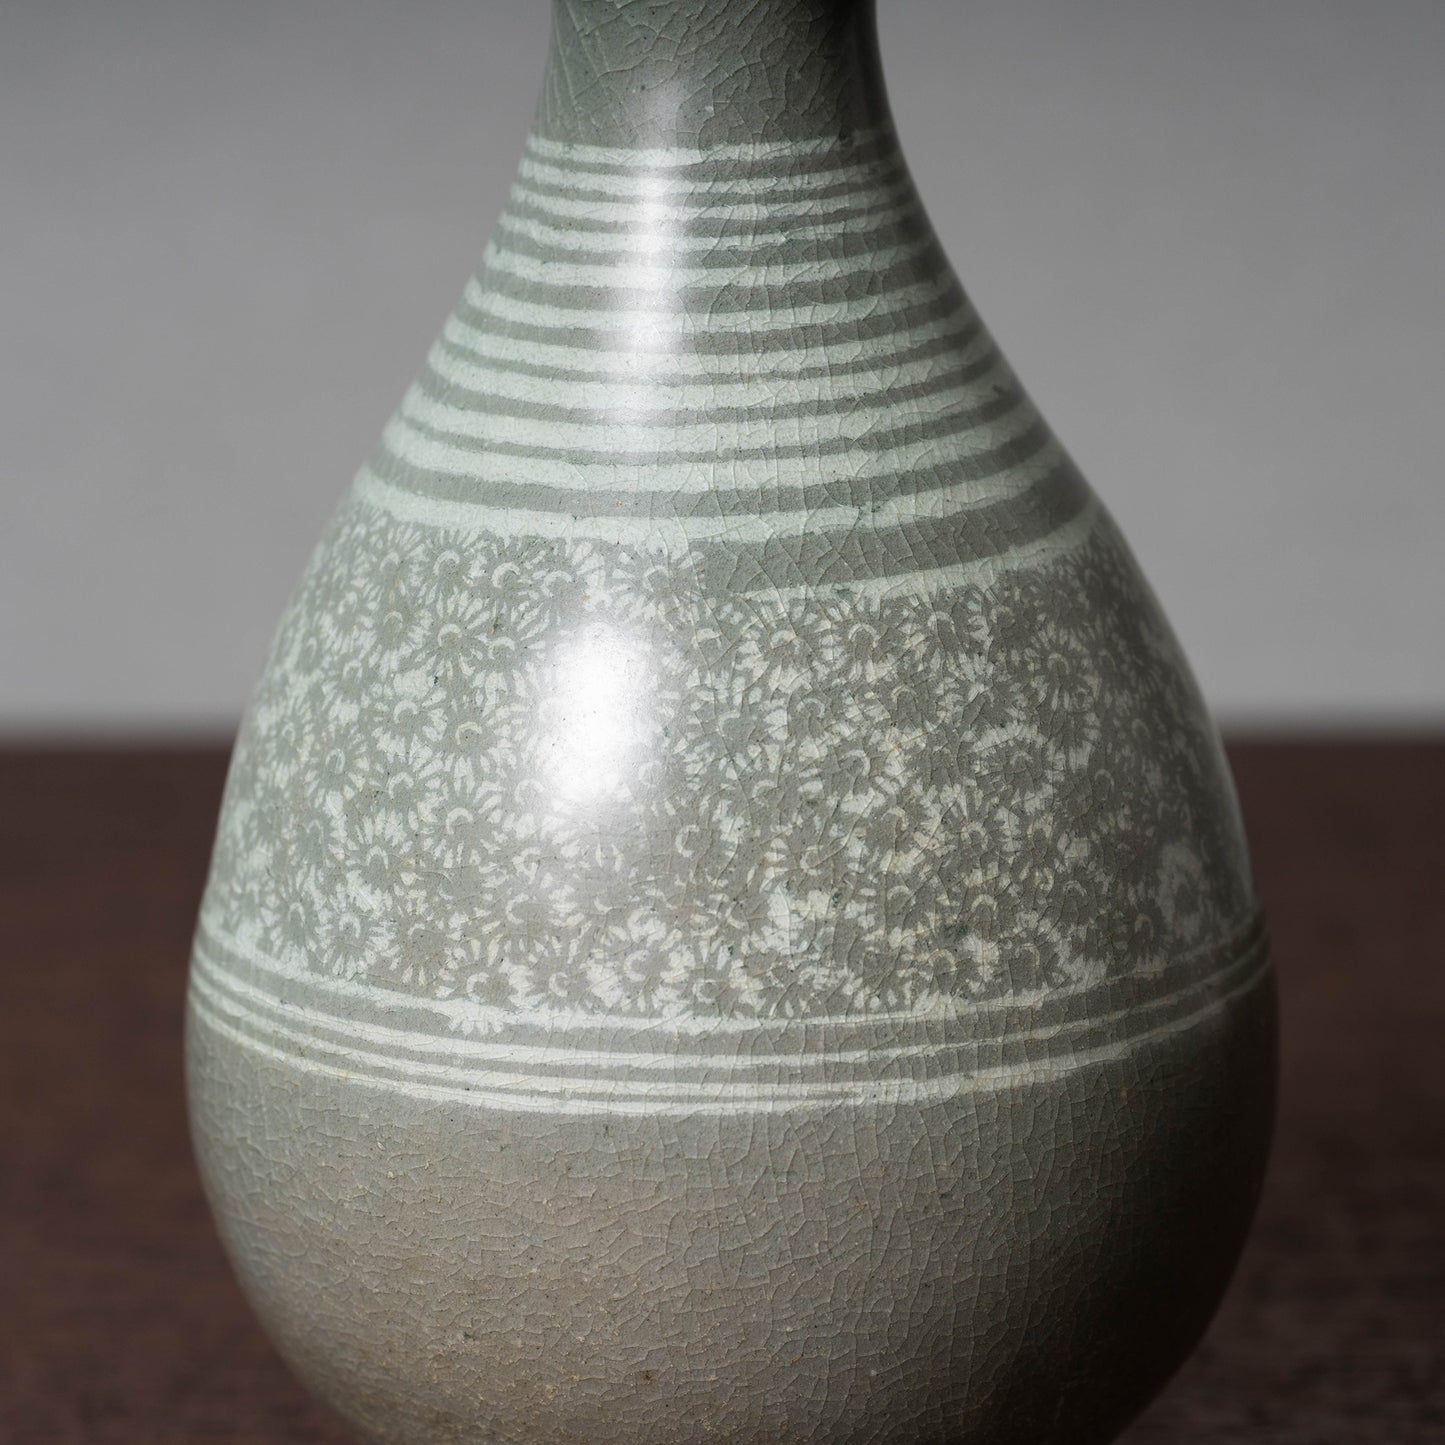 Goryeo Dynasty Celadon Bottle with Inlaid Flower Design